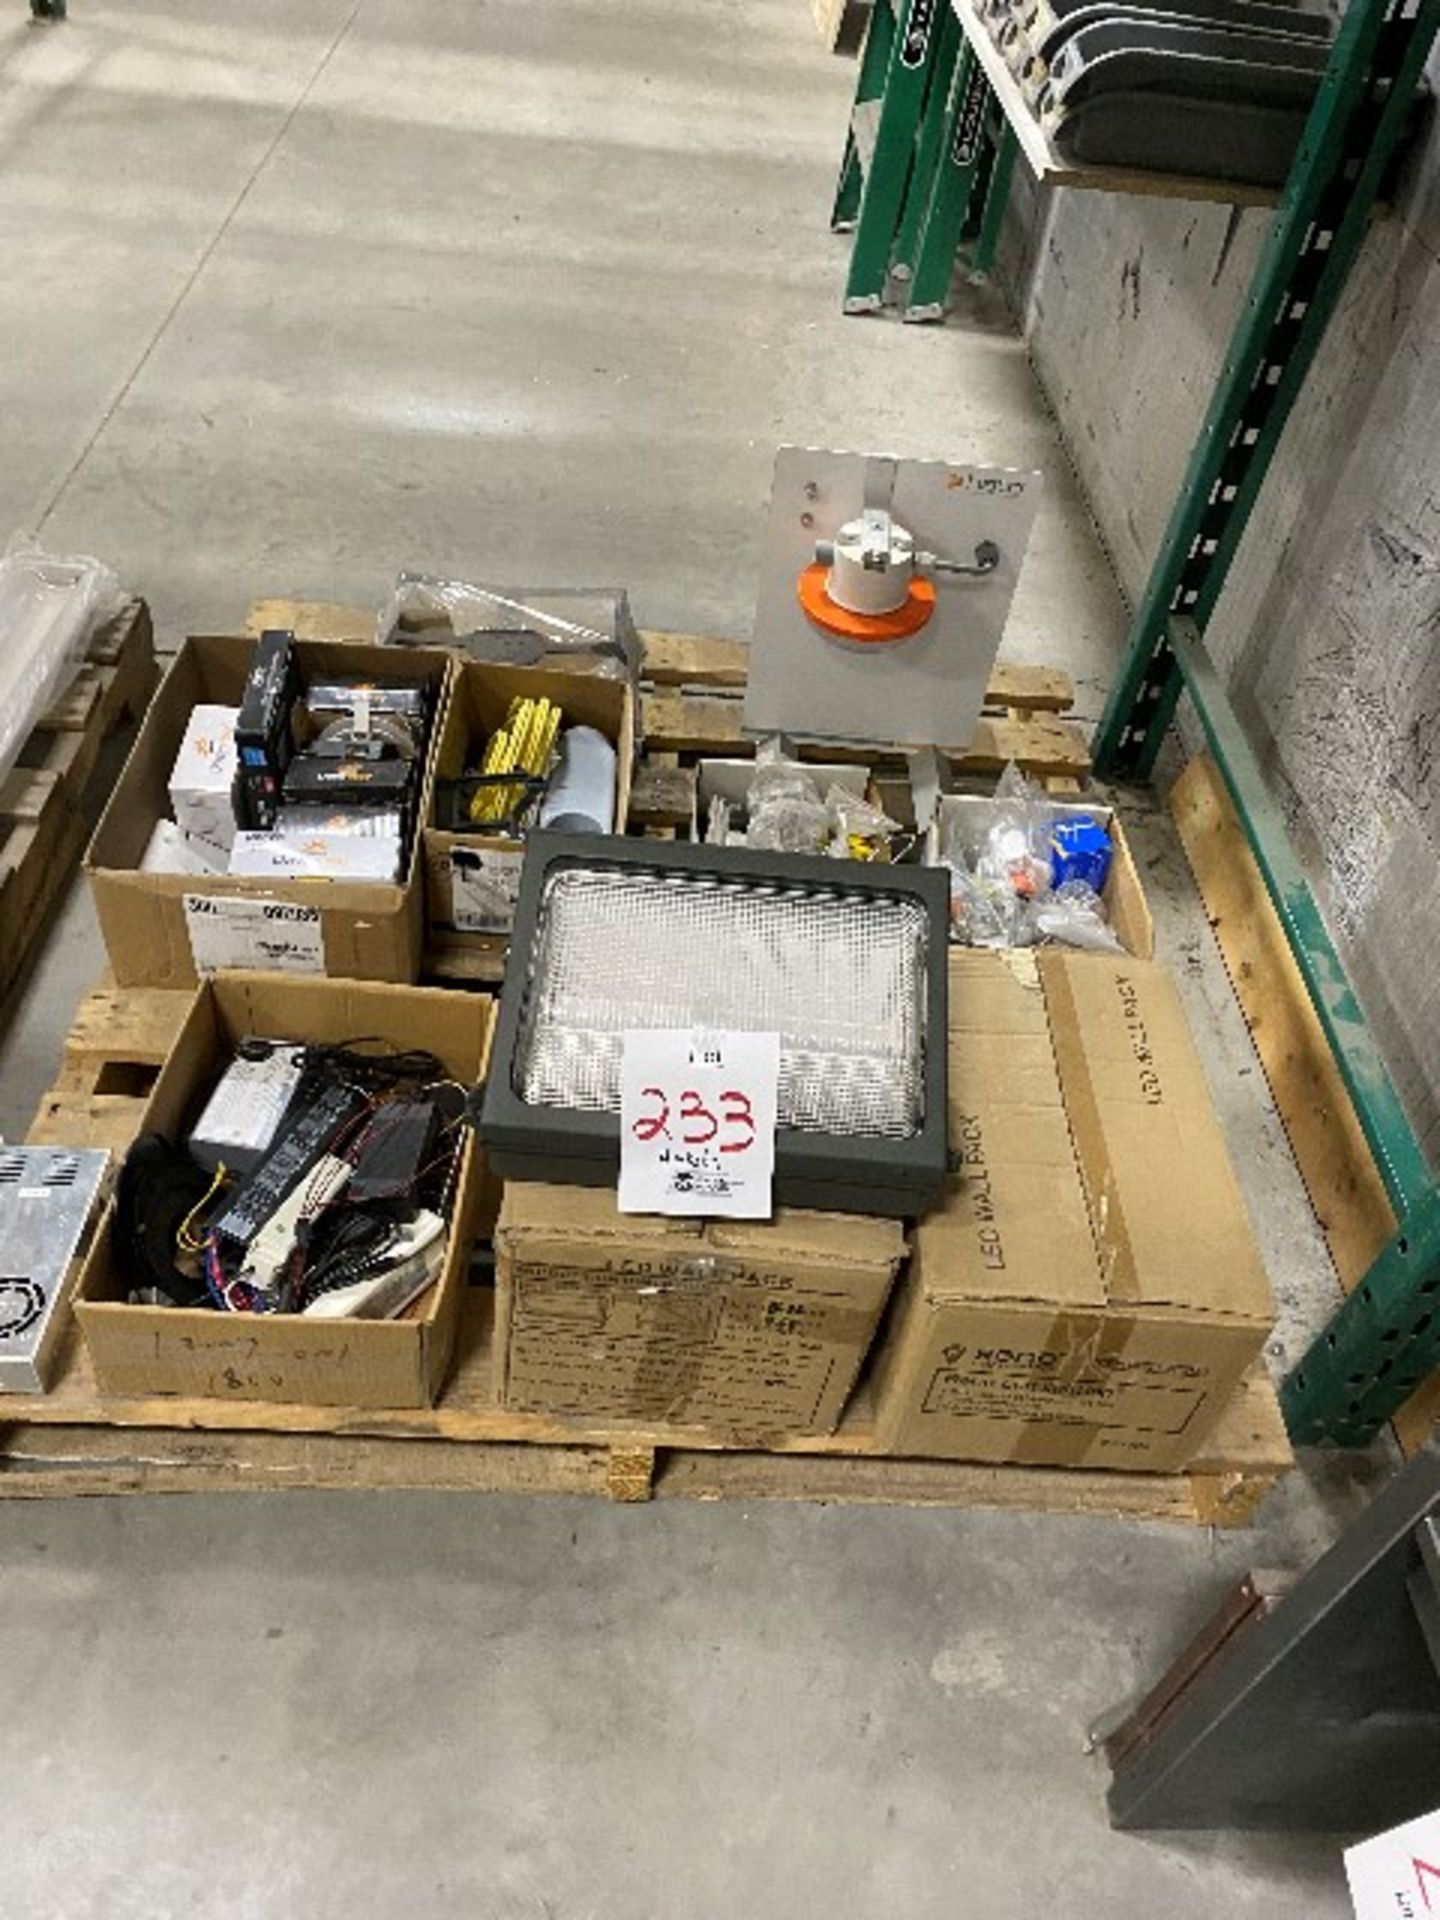 LOT: Assorted lighting fixtures, etc... (TEL QUEL/NON TESTED), 4 skids